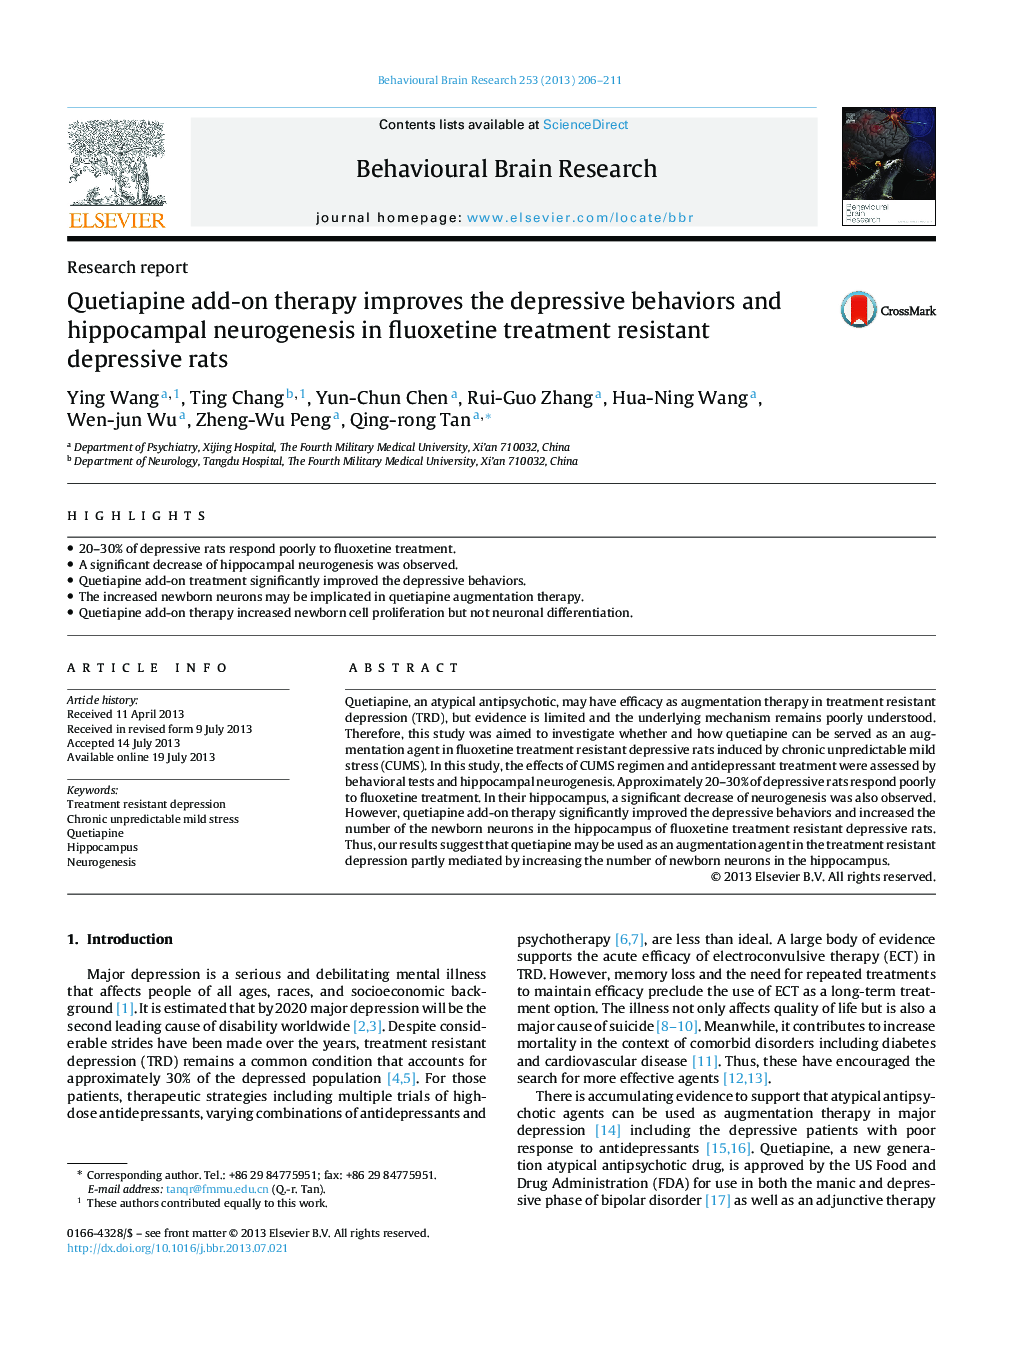 Research reportQuetiapine add-on therapy improves the depressive behaviors and hippocampal neurogenesis in fluoxetine treatment resistant depressive rats